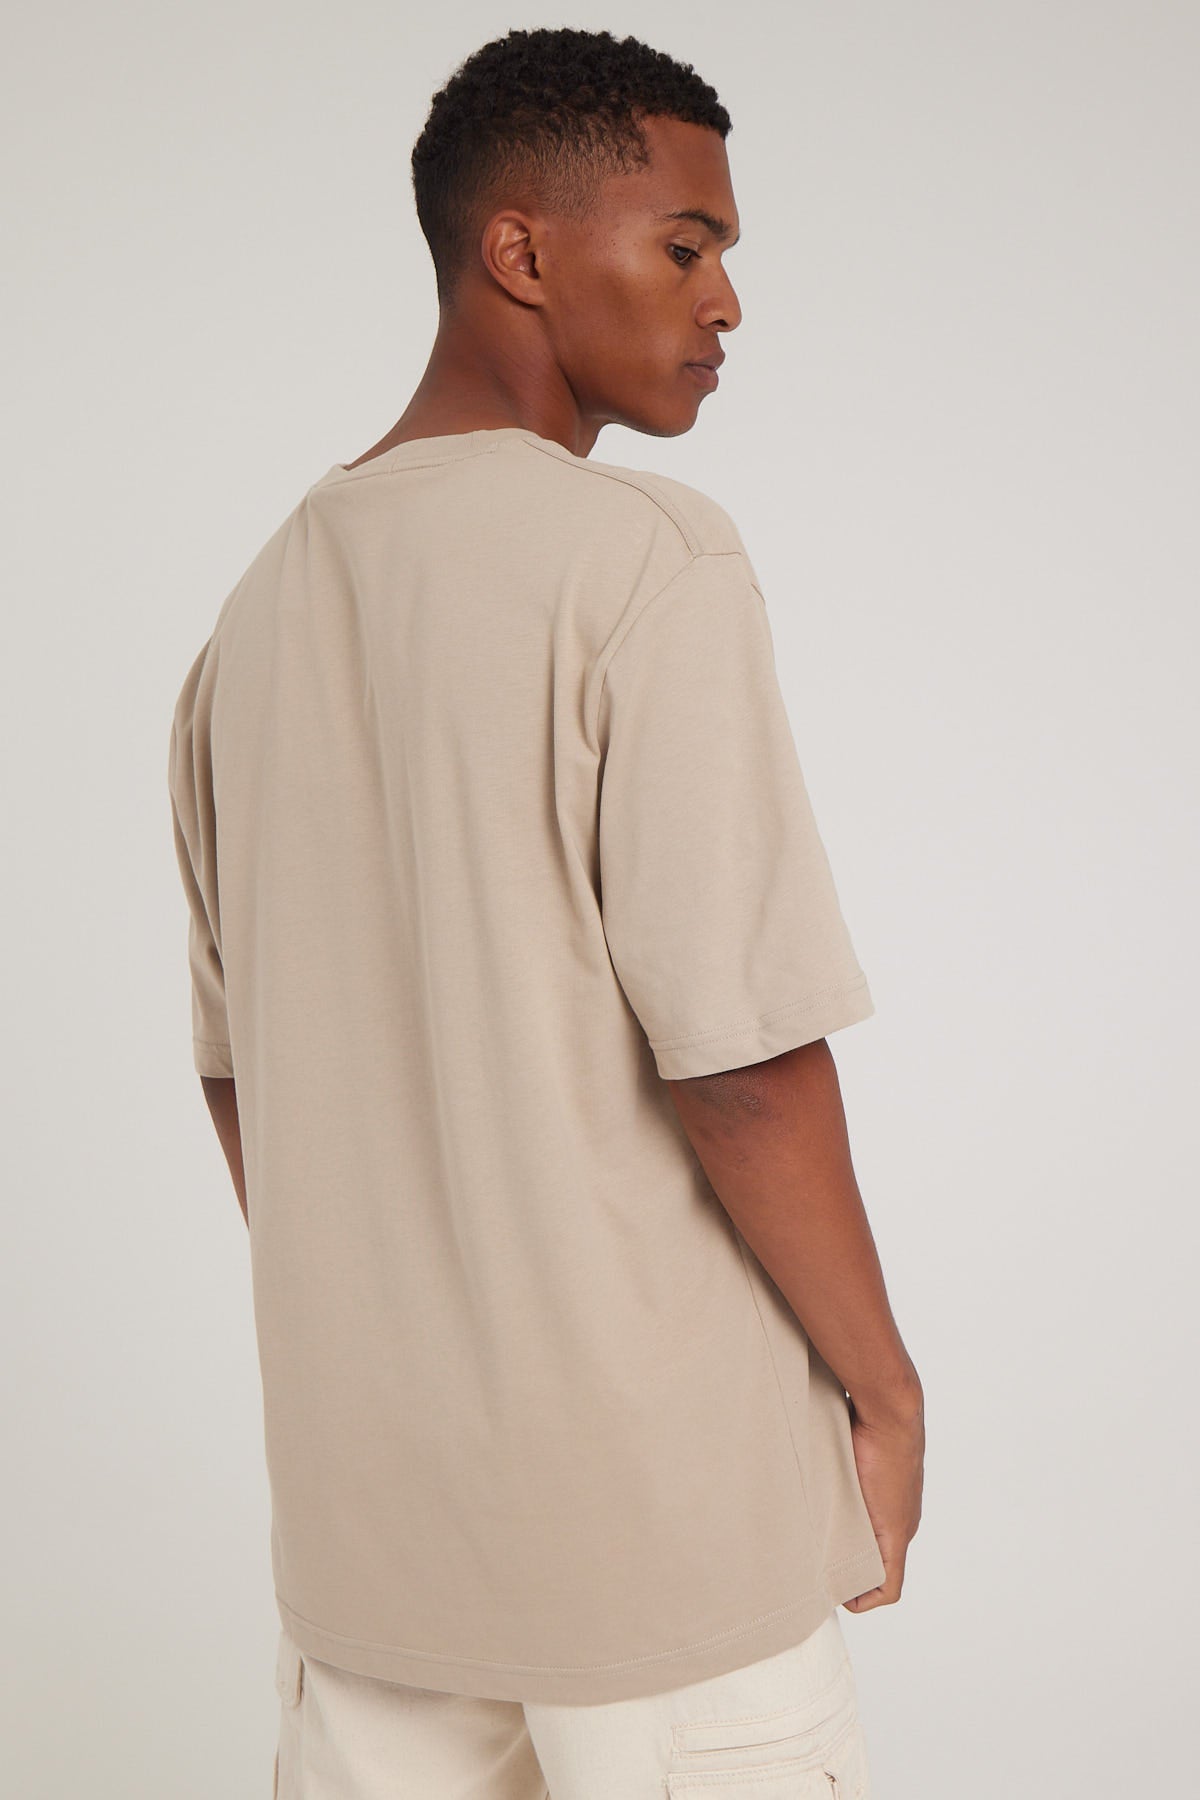 Calvin Klein Vertical Institutional Tee Plaza Taupe